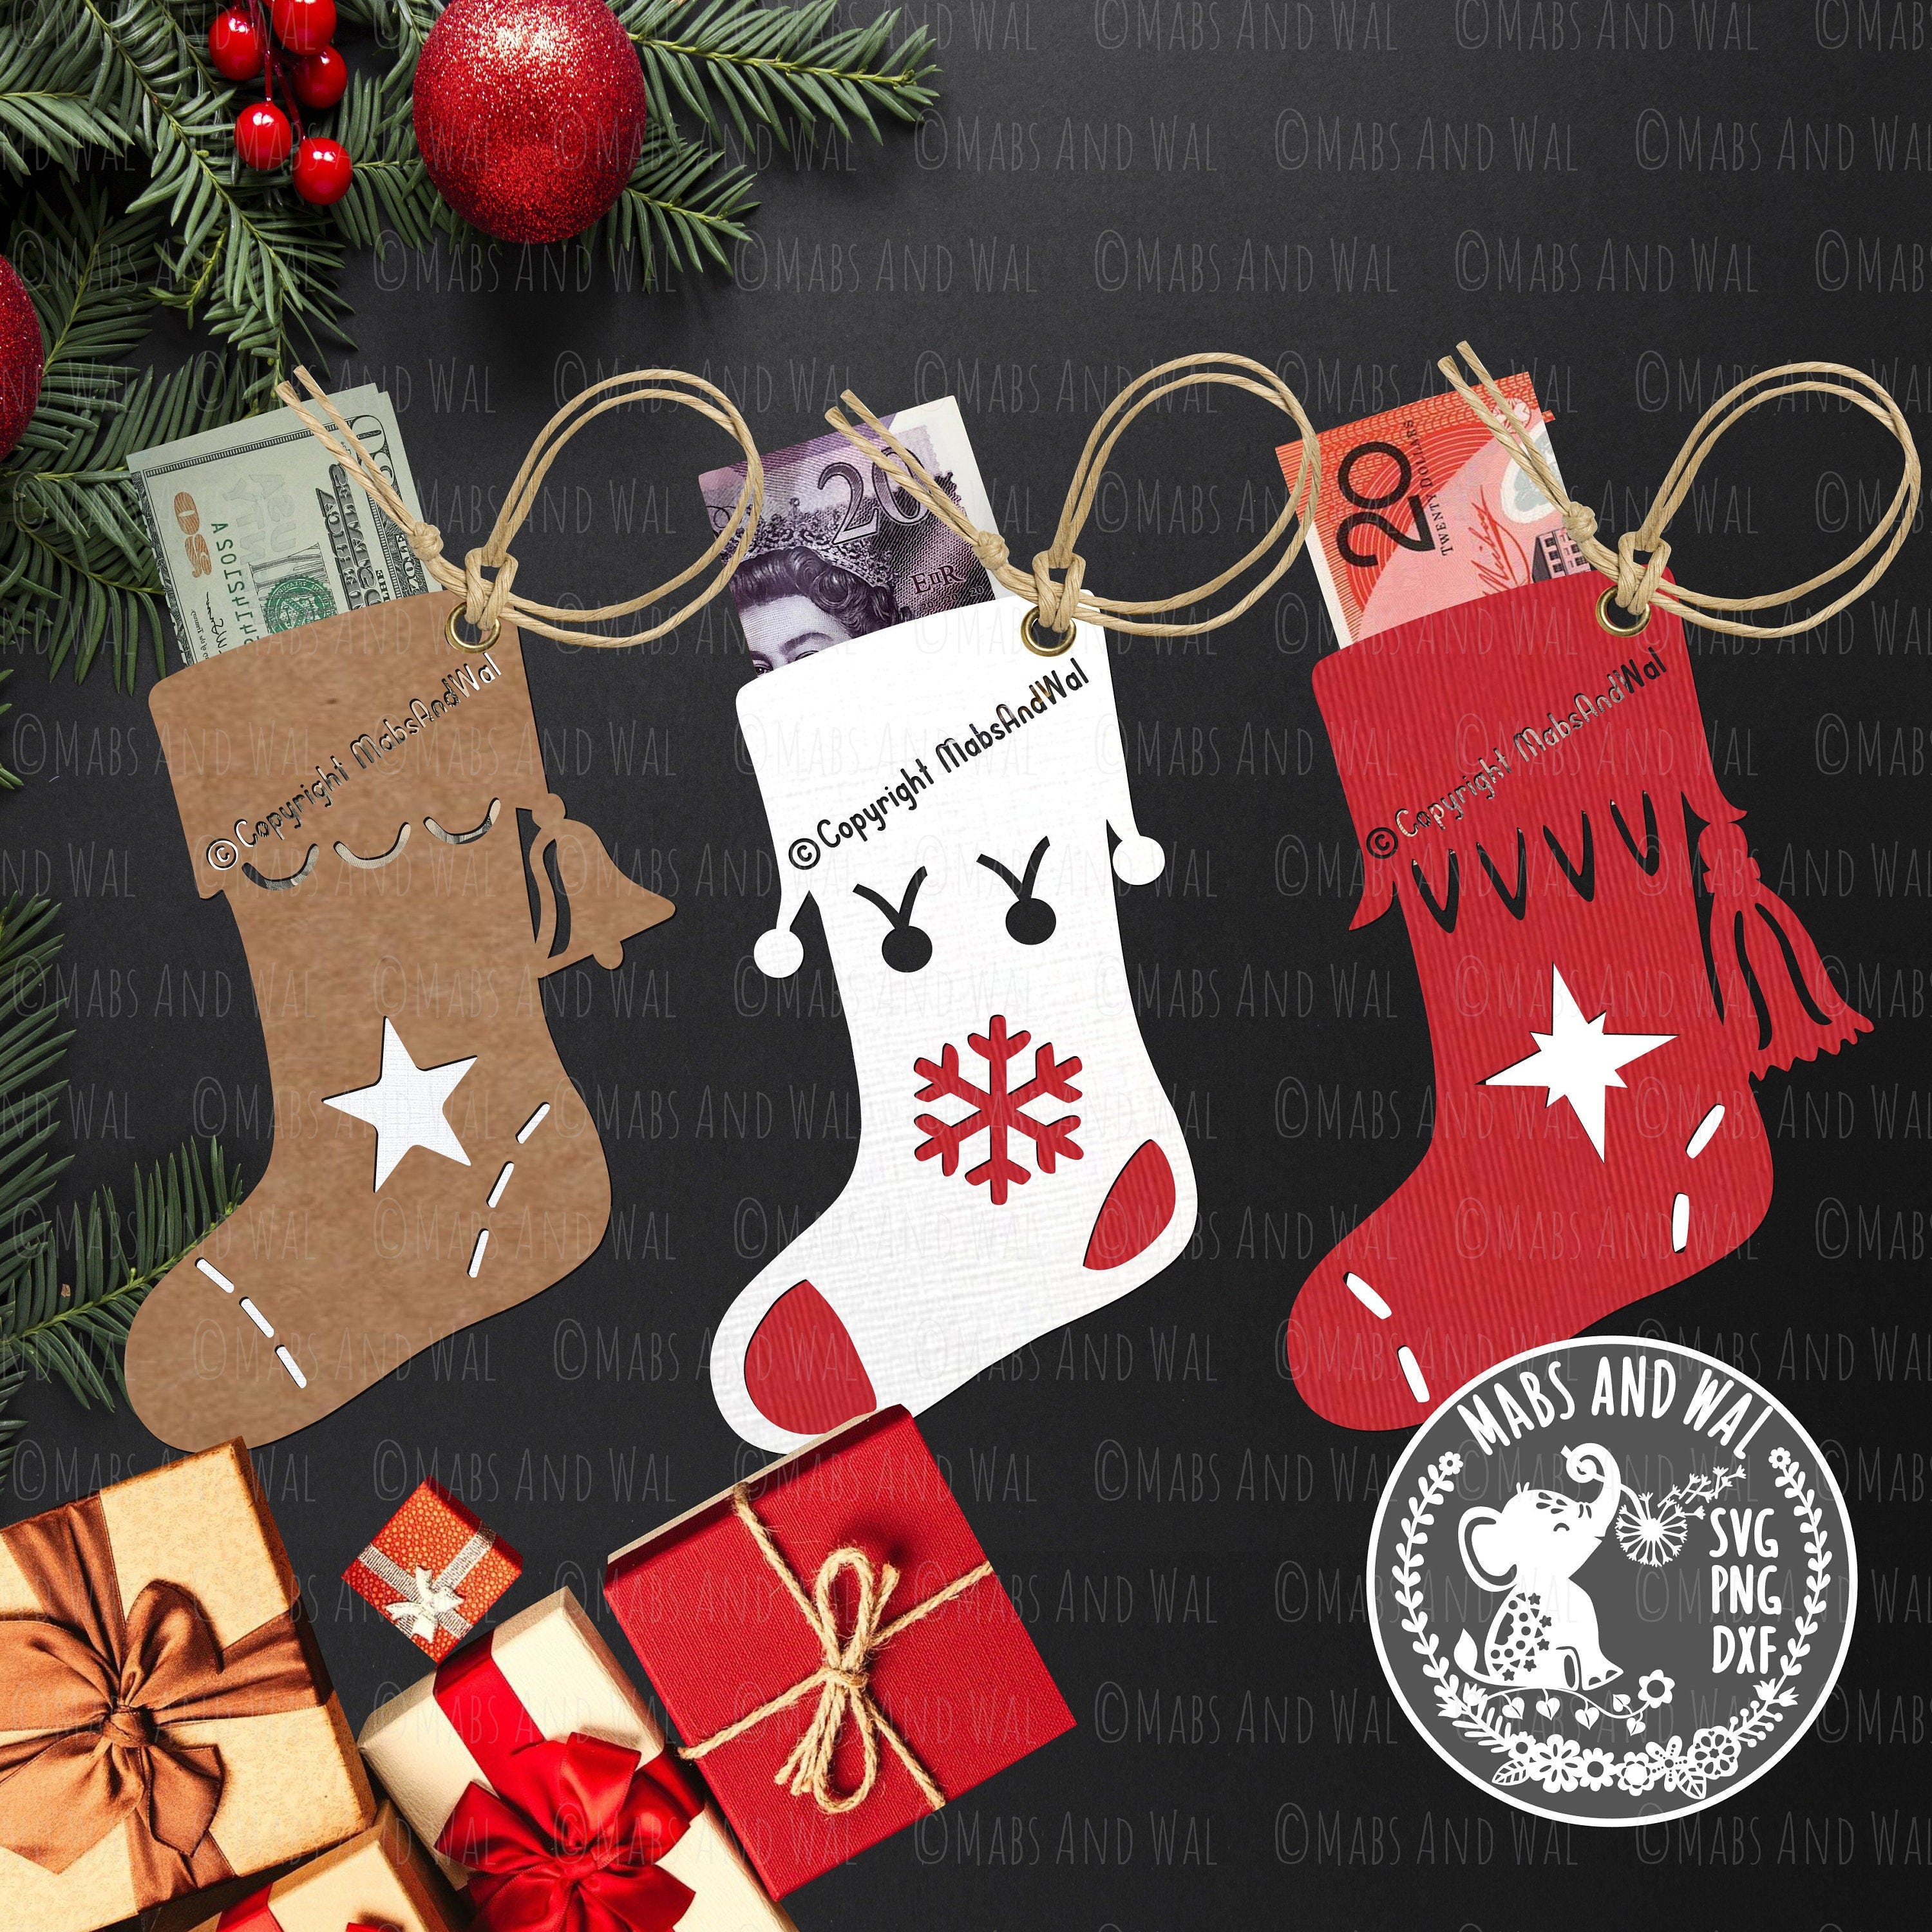 Money holder Christmas stocking gift tags SVG PNG DXF digital cutting file/Christmas svg/Christmas money holder/holiday gift/commercial use